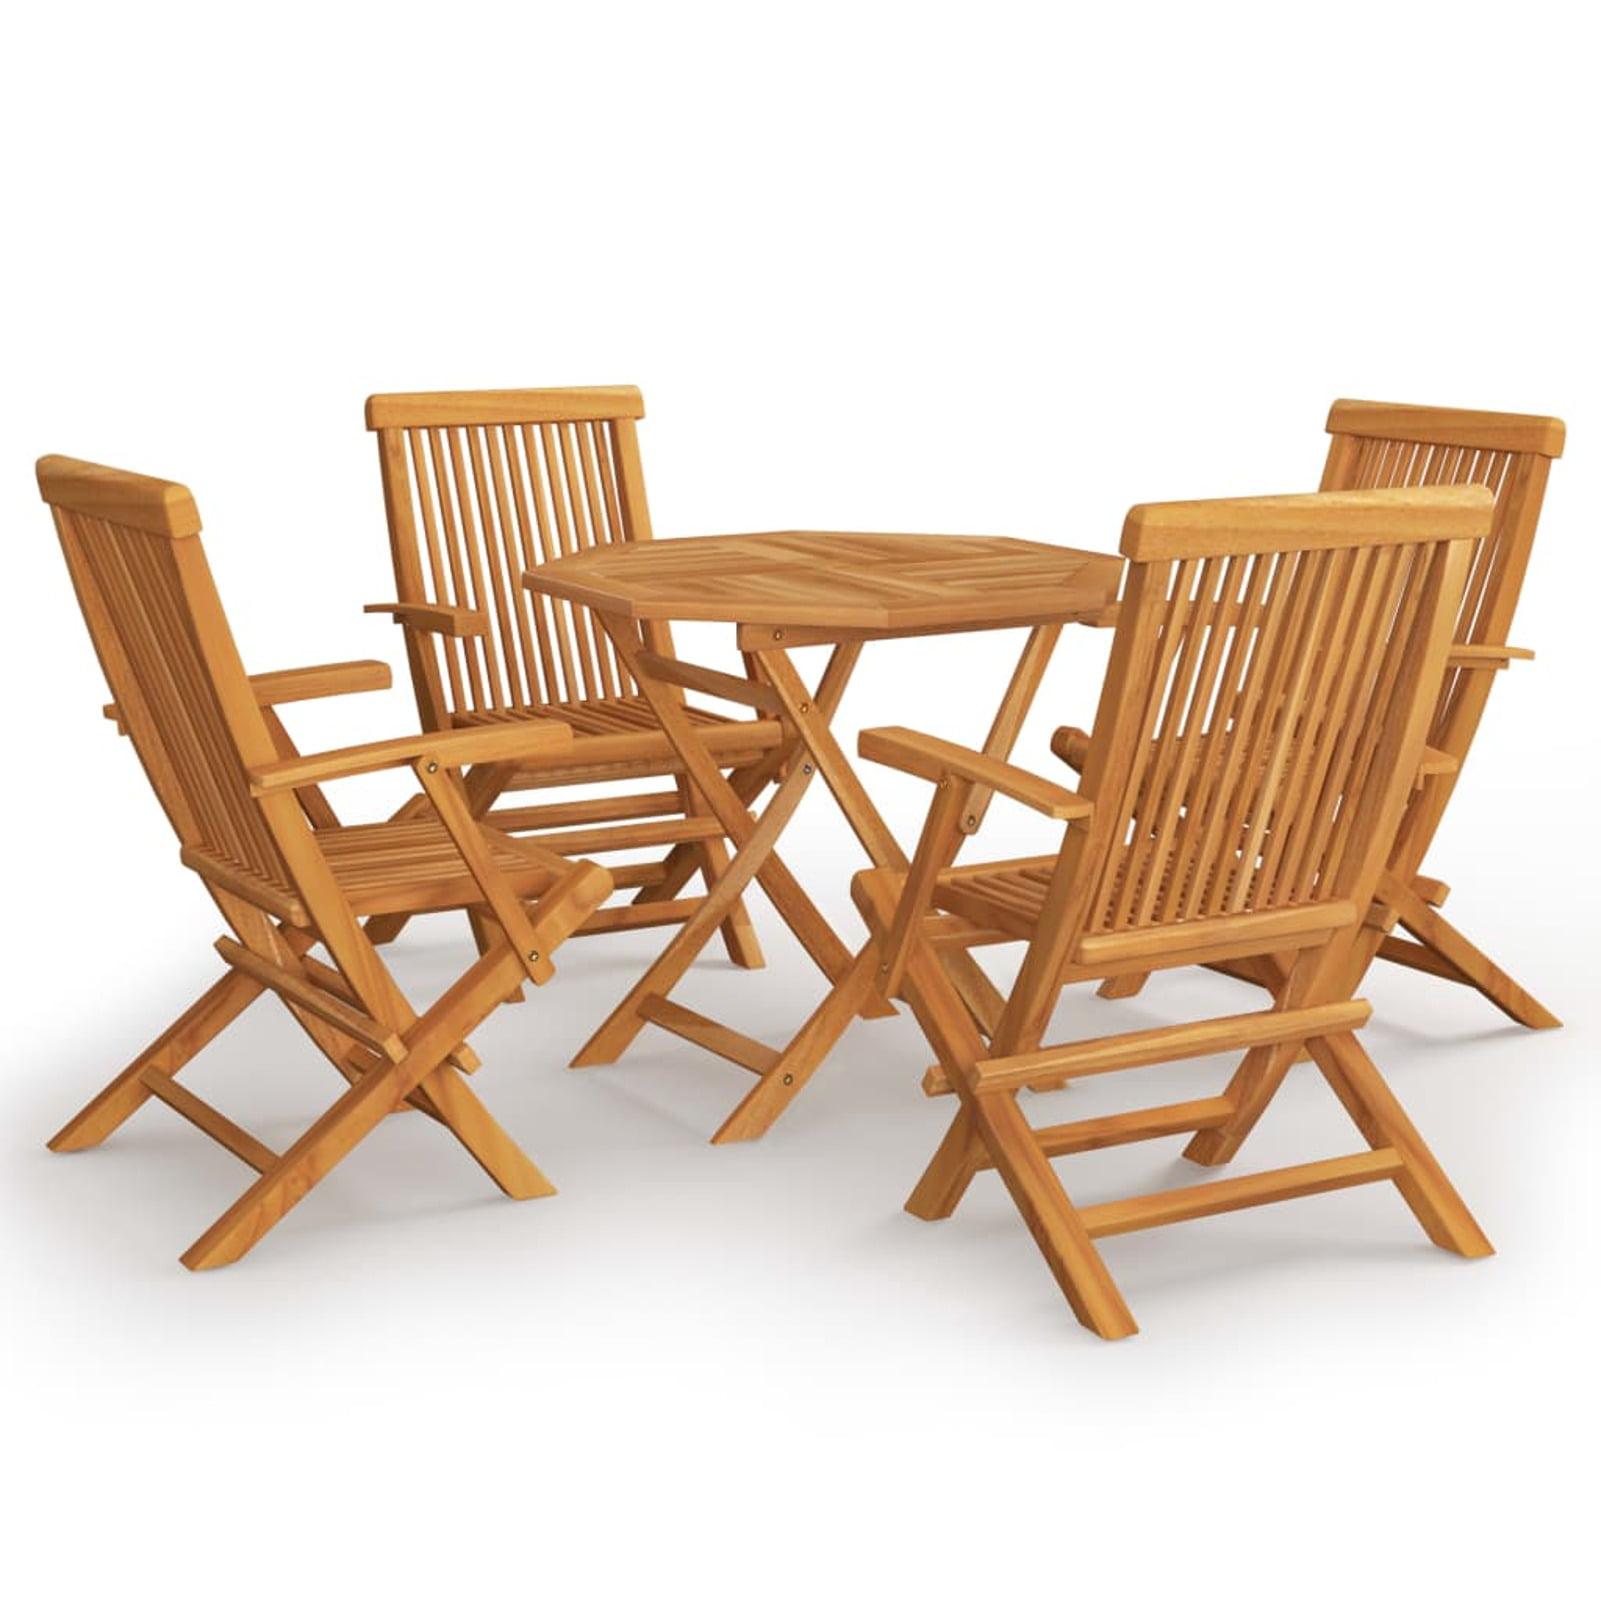 Classic Teak 5-Piece Foldable Outdoor Dining Set with Round Table